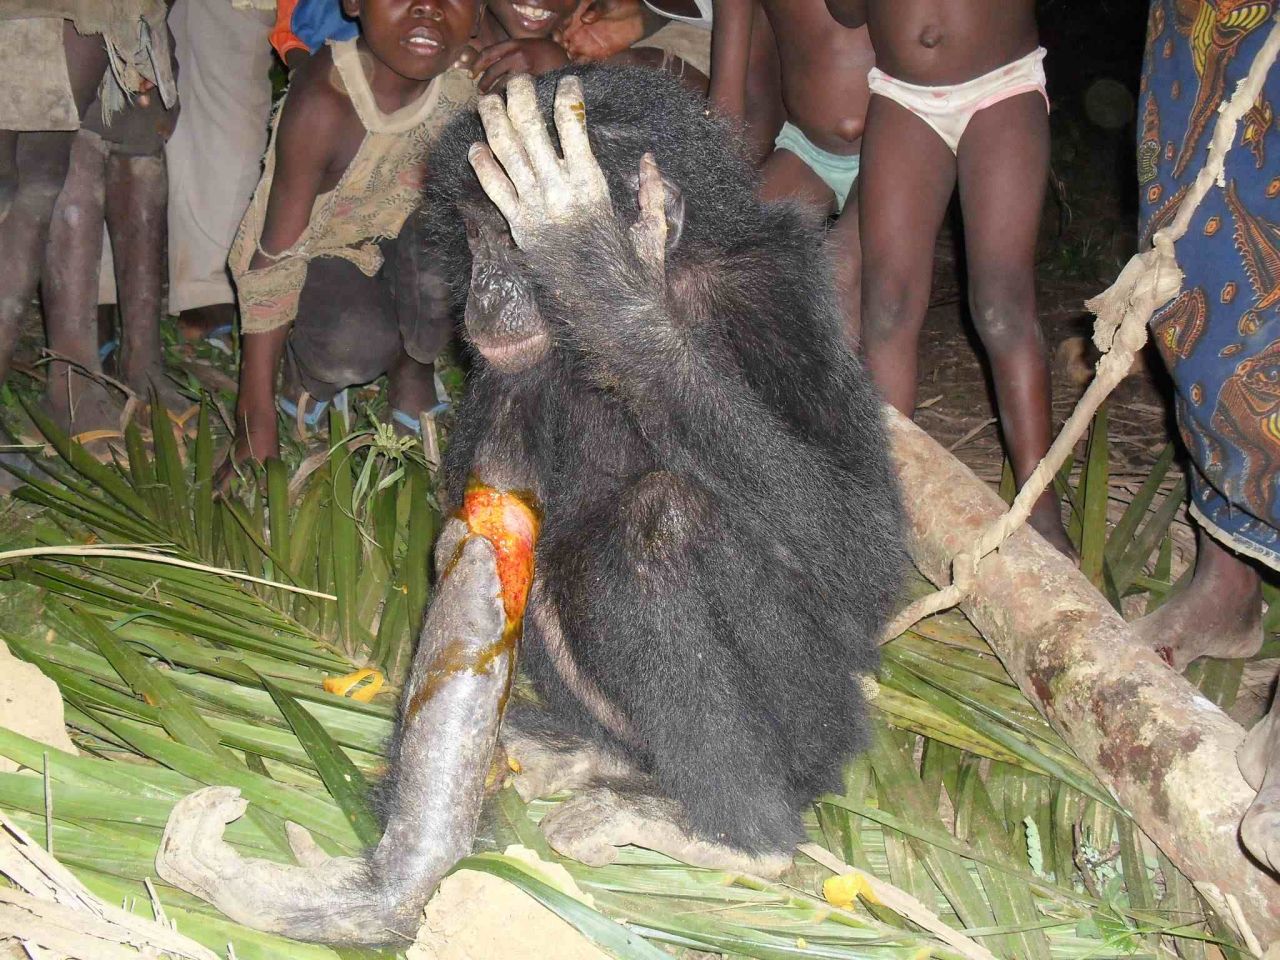 In November 2012, hunters in Bolomba contacted the sanctuary about this injured young orphan because they "didn't want to catch a bonobo in their trap."